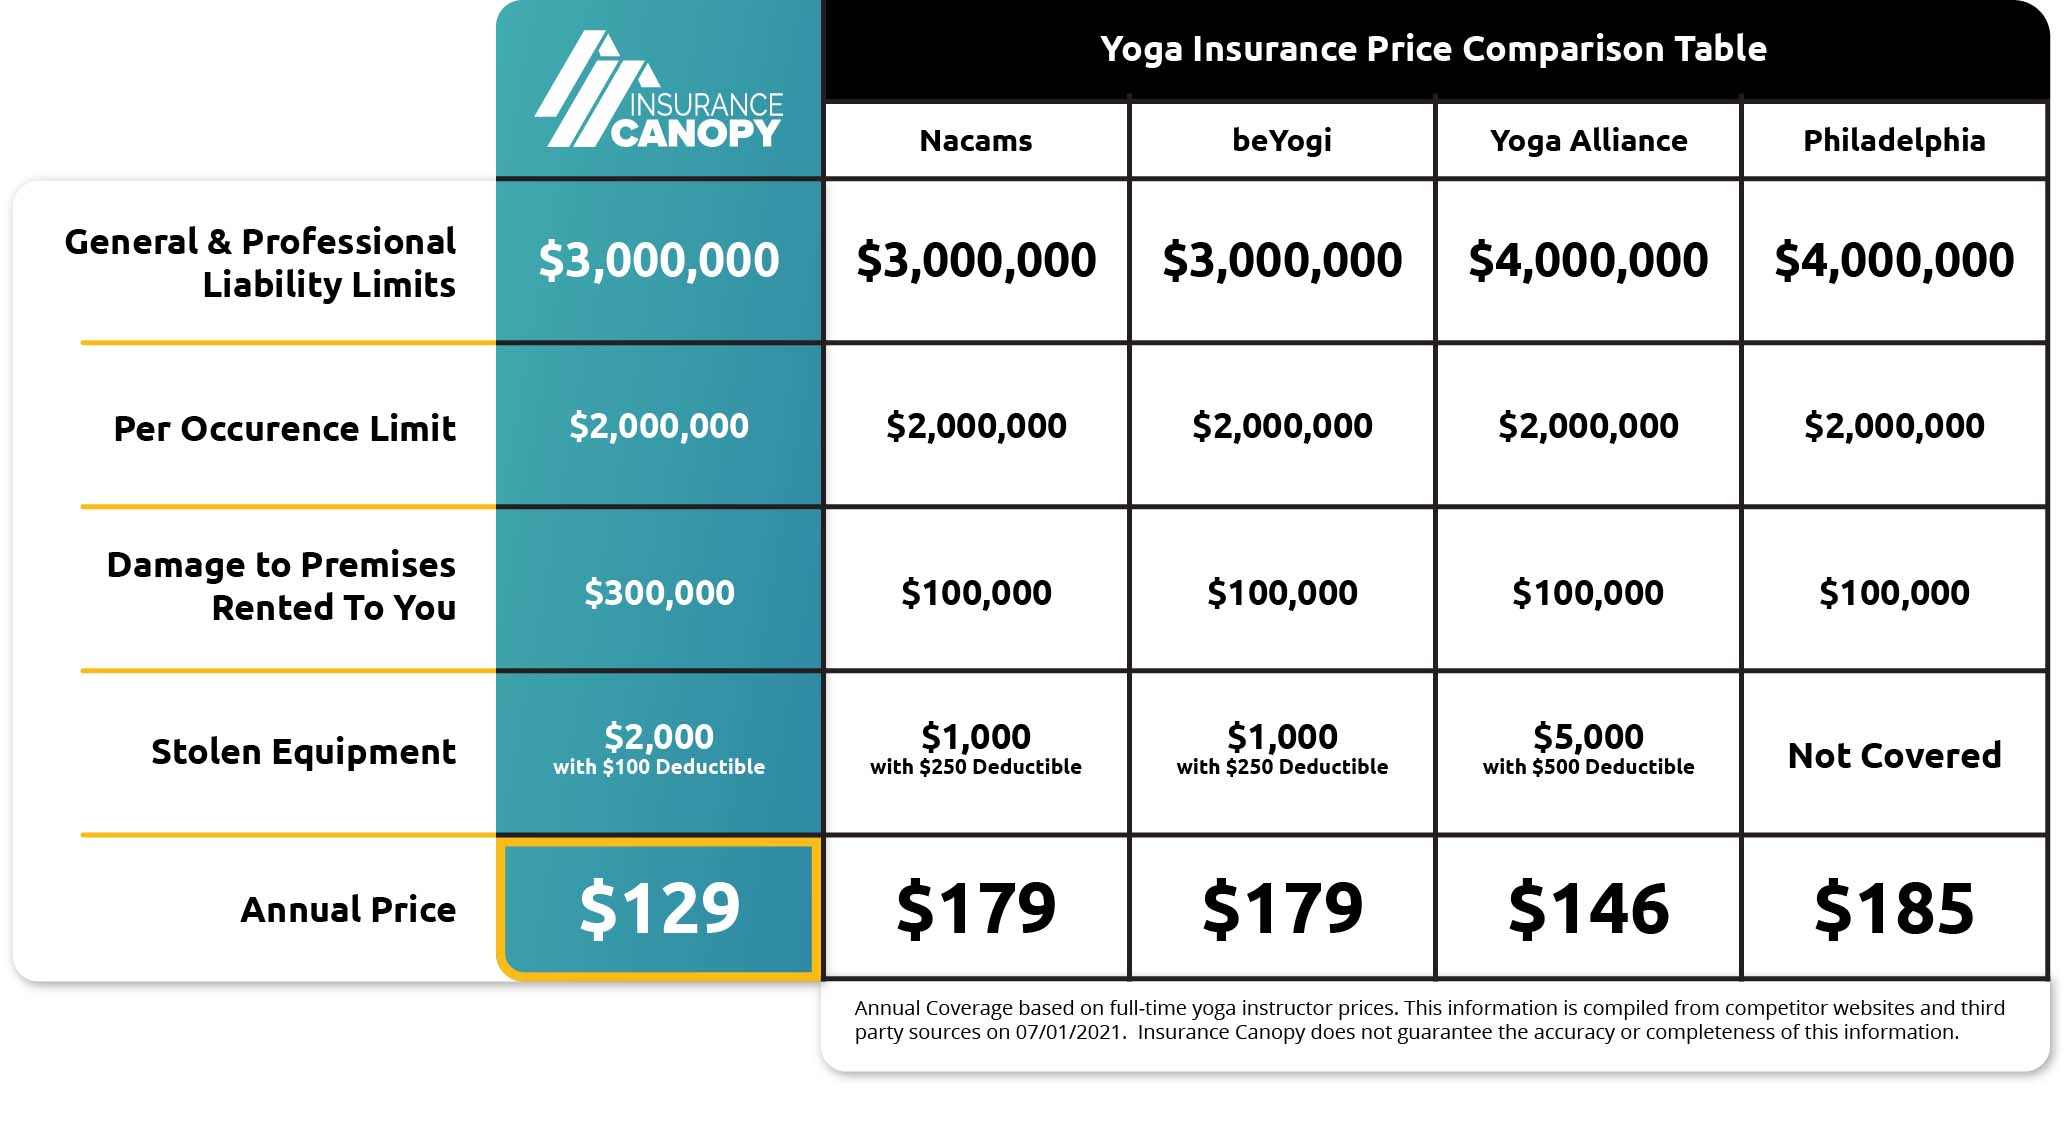 See a breakdown of the best yoga insurance prices and compare competitors. Insurance Canopy offers the best coverage at an unbeatable rate.